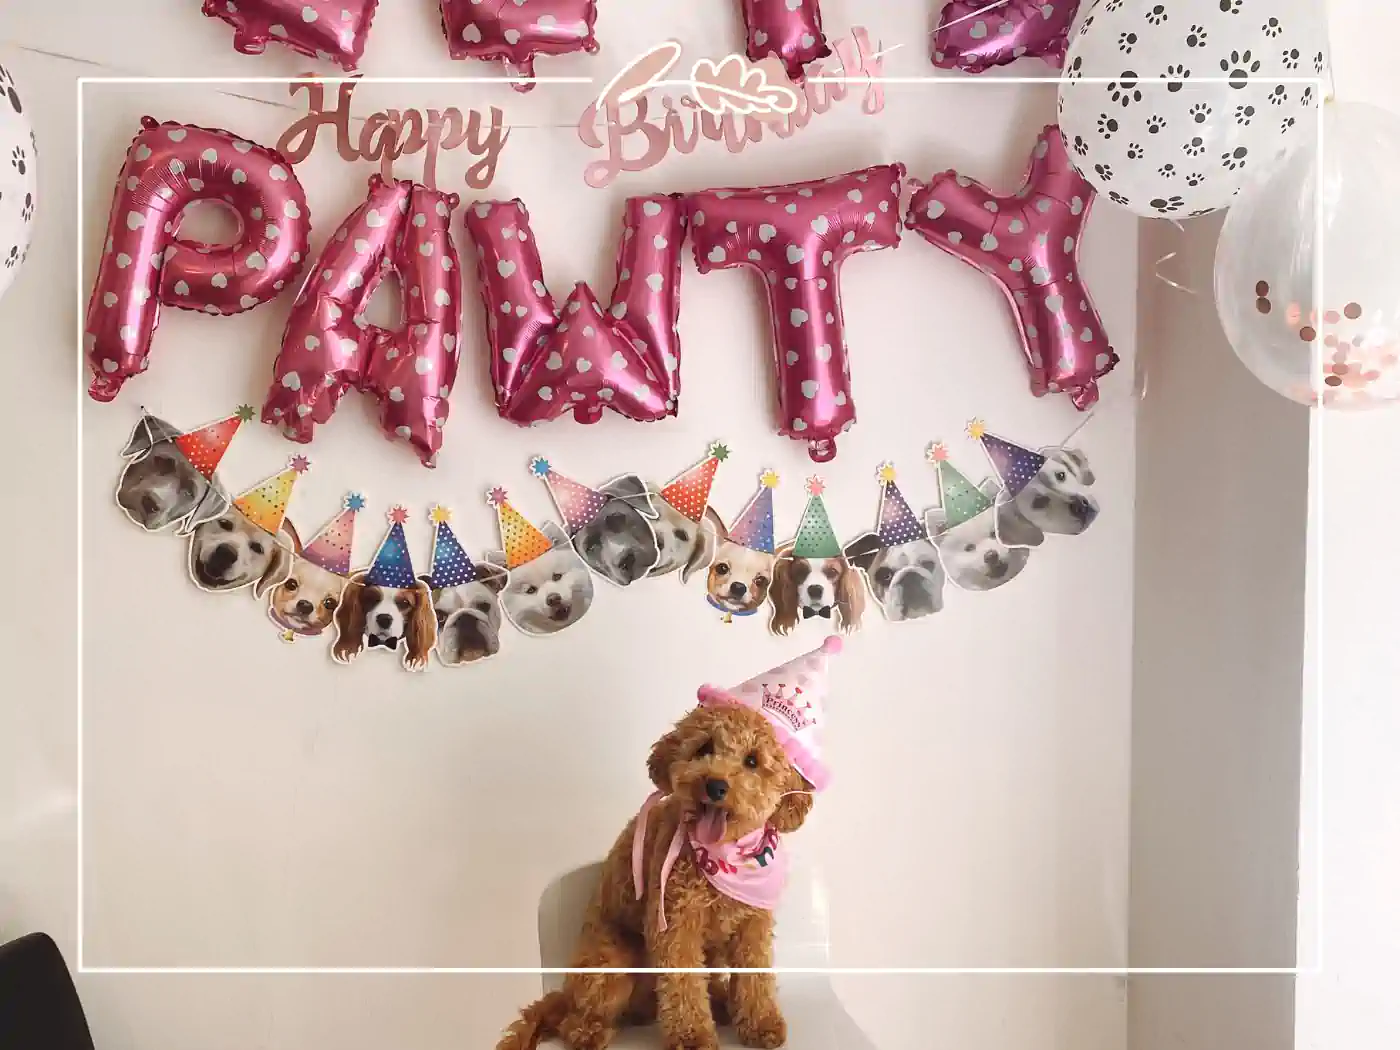 A small dog wearing a party hat sitting under a "Happy Pawty" banner with balloons and dog faces. Fabulous Flowers and Gifts - Birthday Collection.